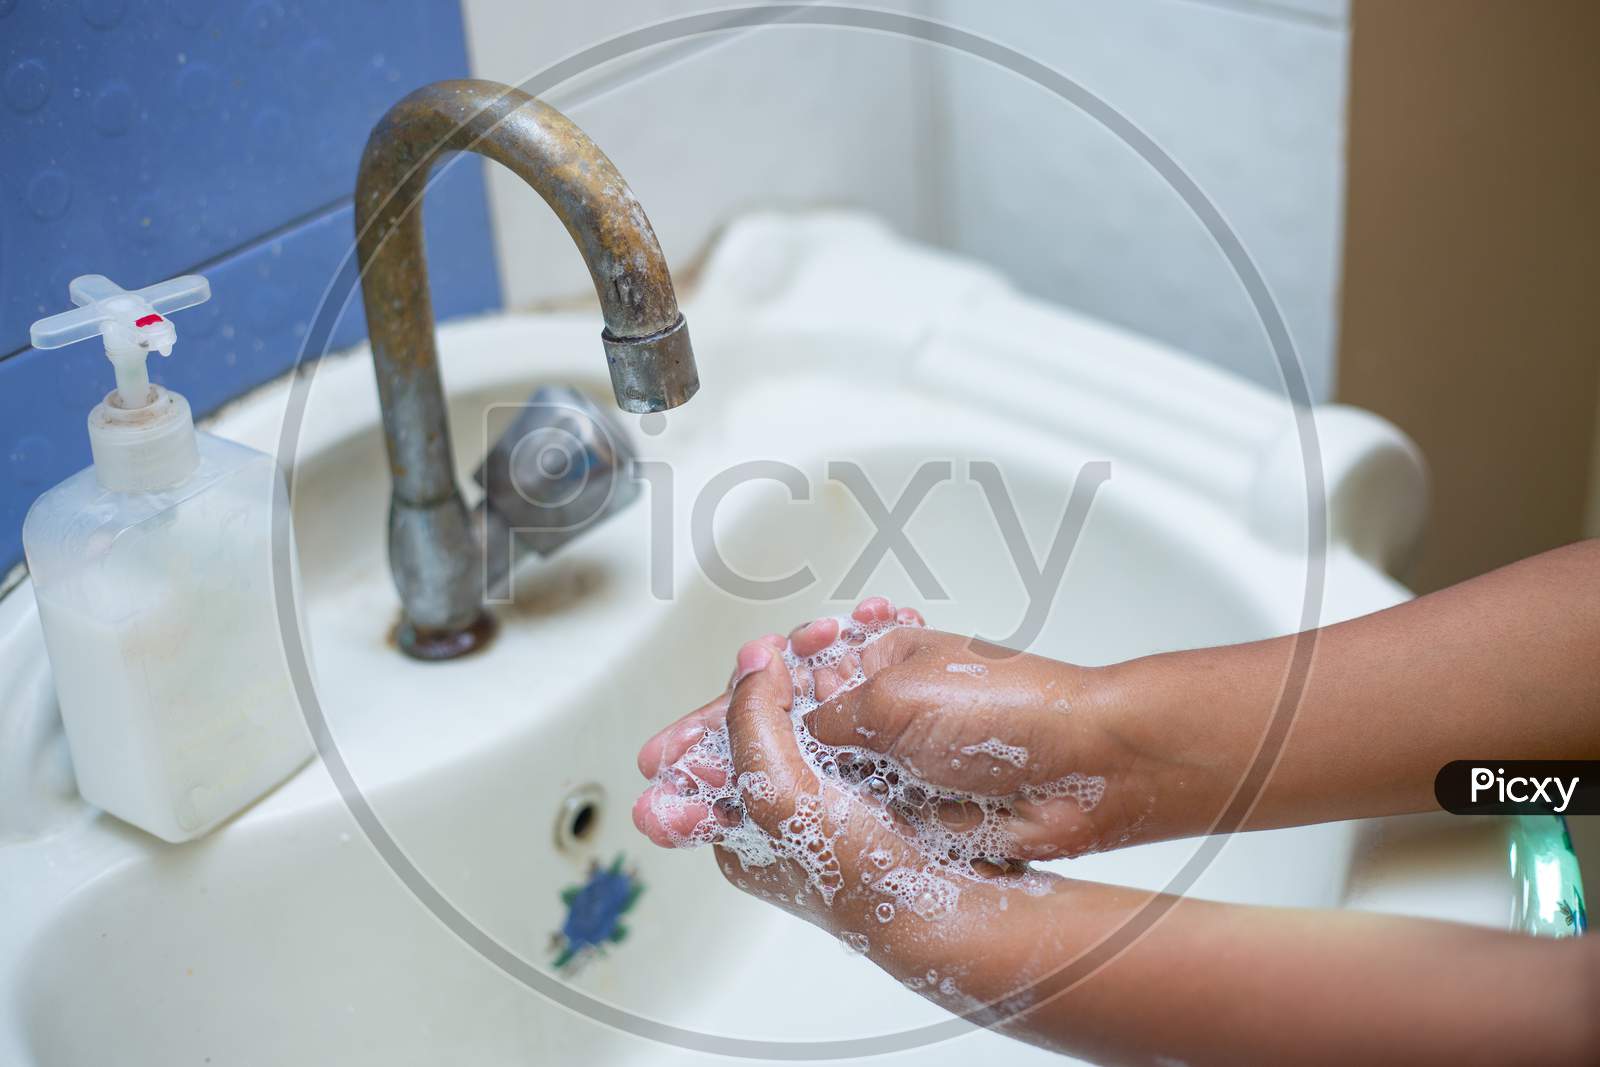 Washing Hands With Soap And Hot Water At Home Bathroom Sink Kid Cleansing Hand Hygiene For Coronavirus Outbreak Prevention. Corona Virus Pandemic Protection By Washing Hands Frequently. Closeup Of Hand Washing With Soap.